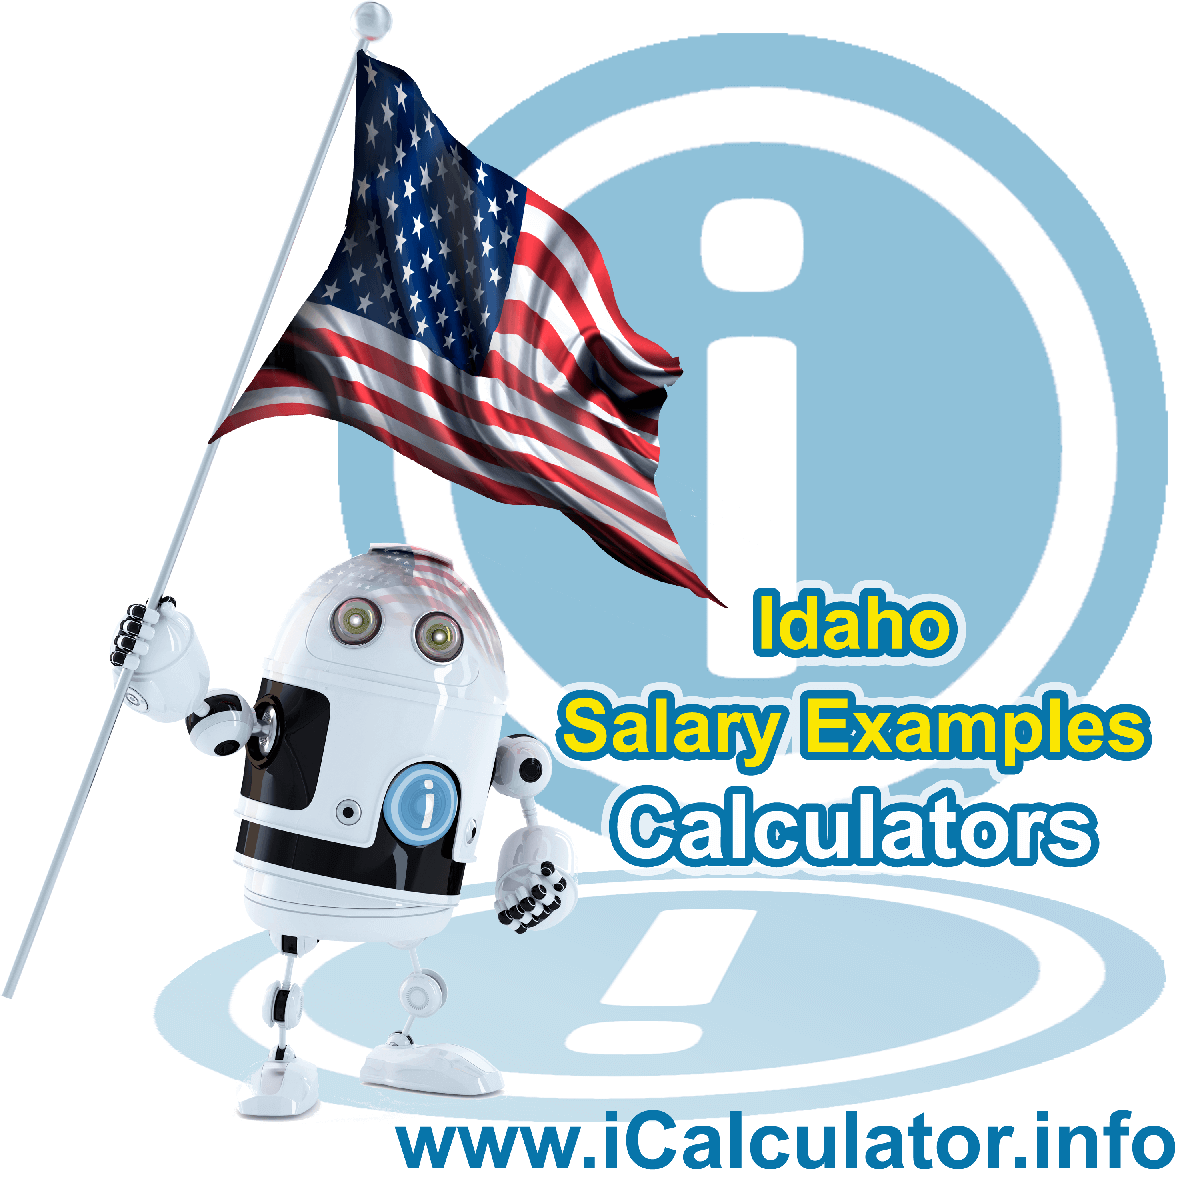 Idaho Salary Example for $90,000.00 in 2022 | iCalculator™ | $90,000.00 salary example for employee and employer paying Idaho State tincome taxes. Detailed salary after tax calculation including Idaho State Tax, Federal State Tax, Medicare Deductions, Social Security, Capital Gains and other income tax and salary deductions complete with supporting Idaho state tax tables 